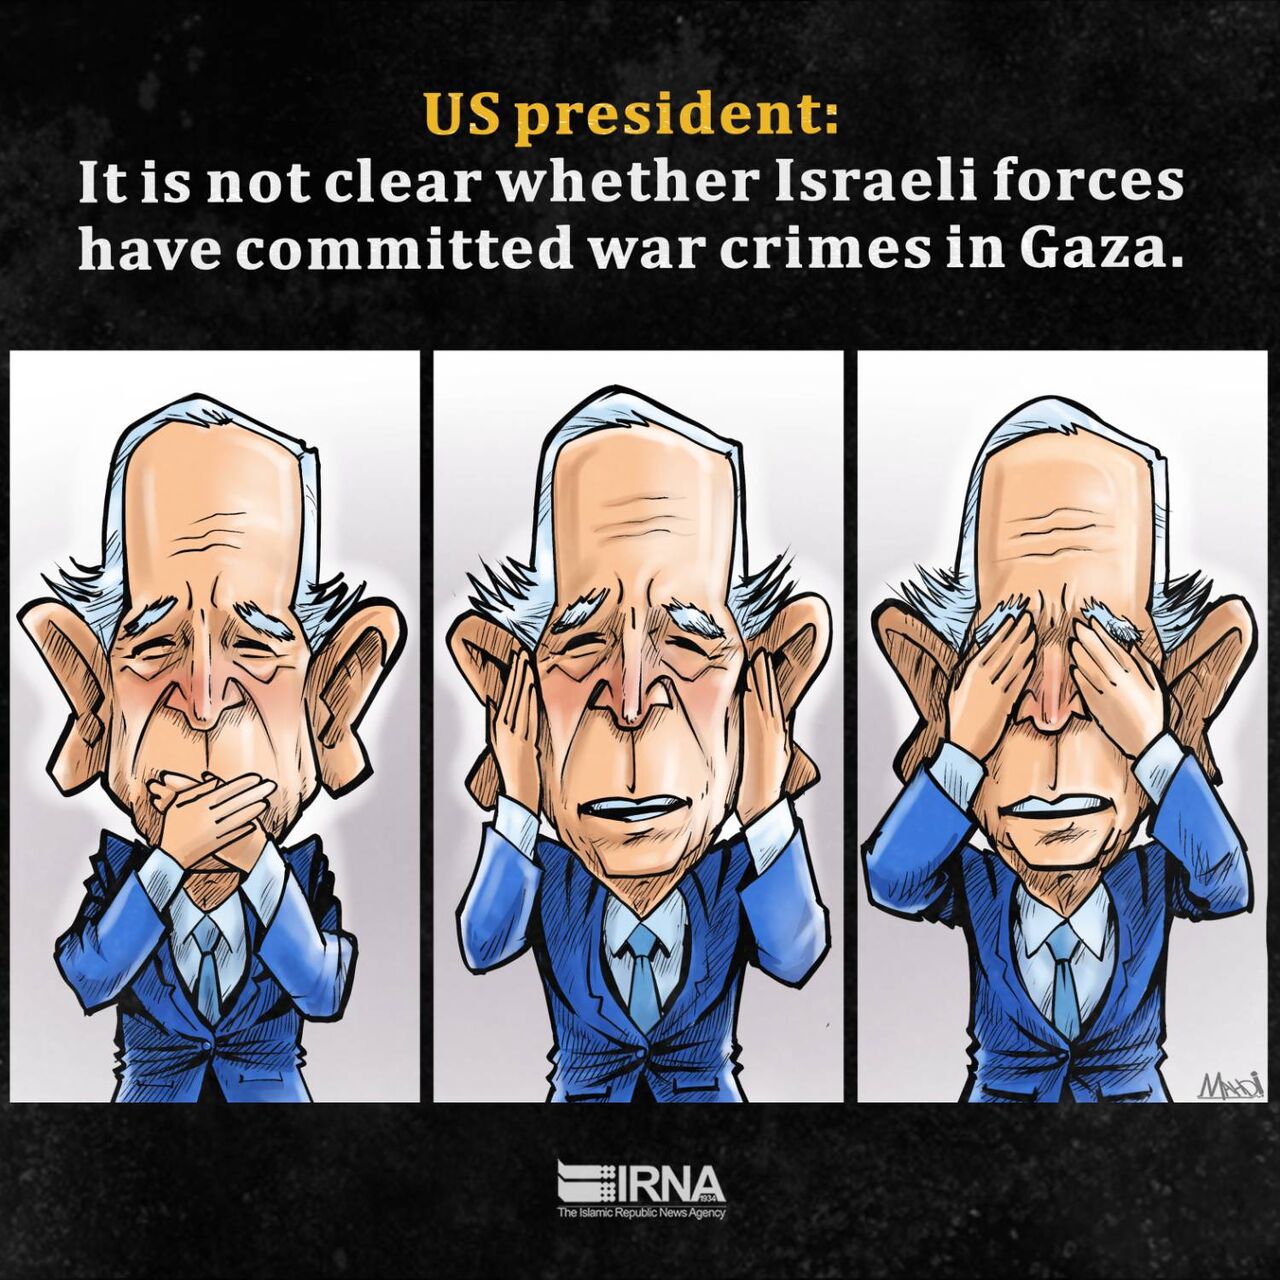 Biden is uncertain whether Israel has committed war crimes in Gaza